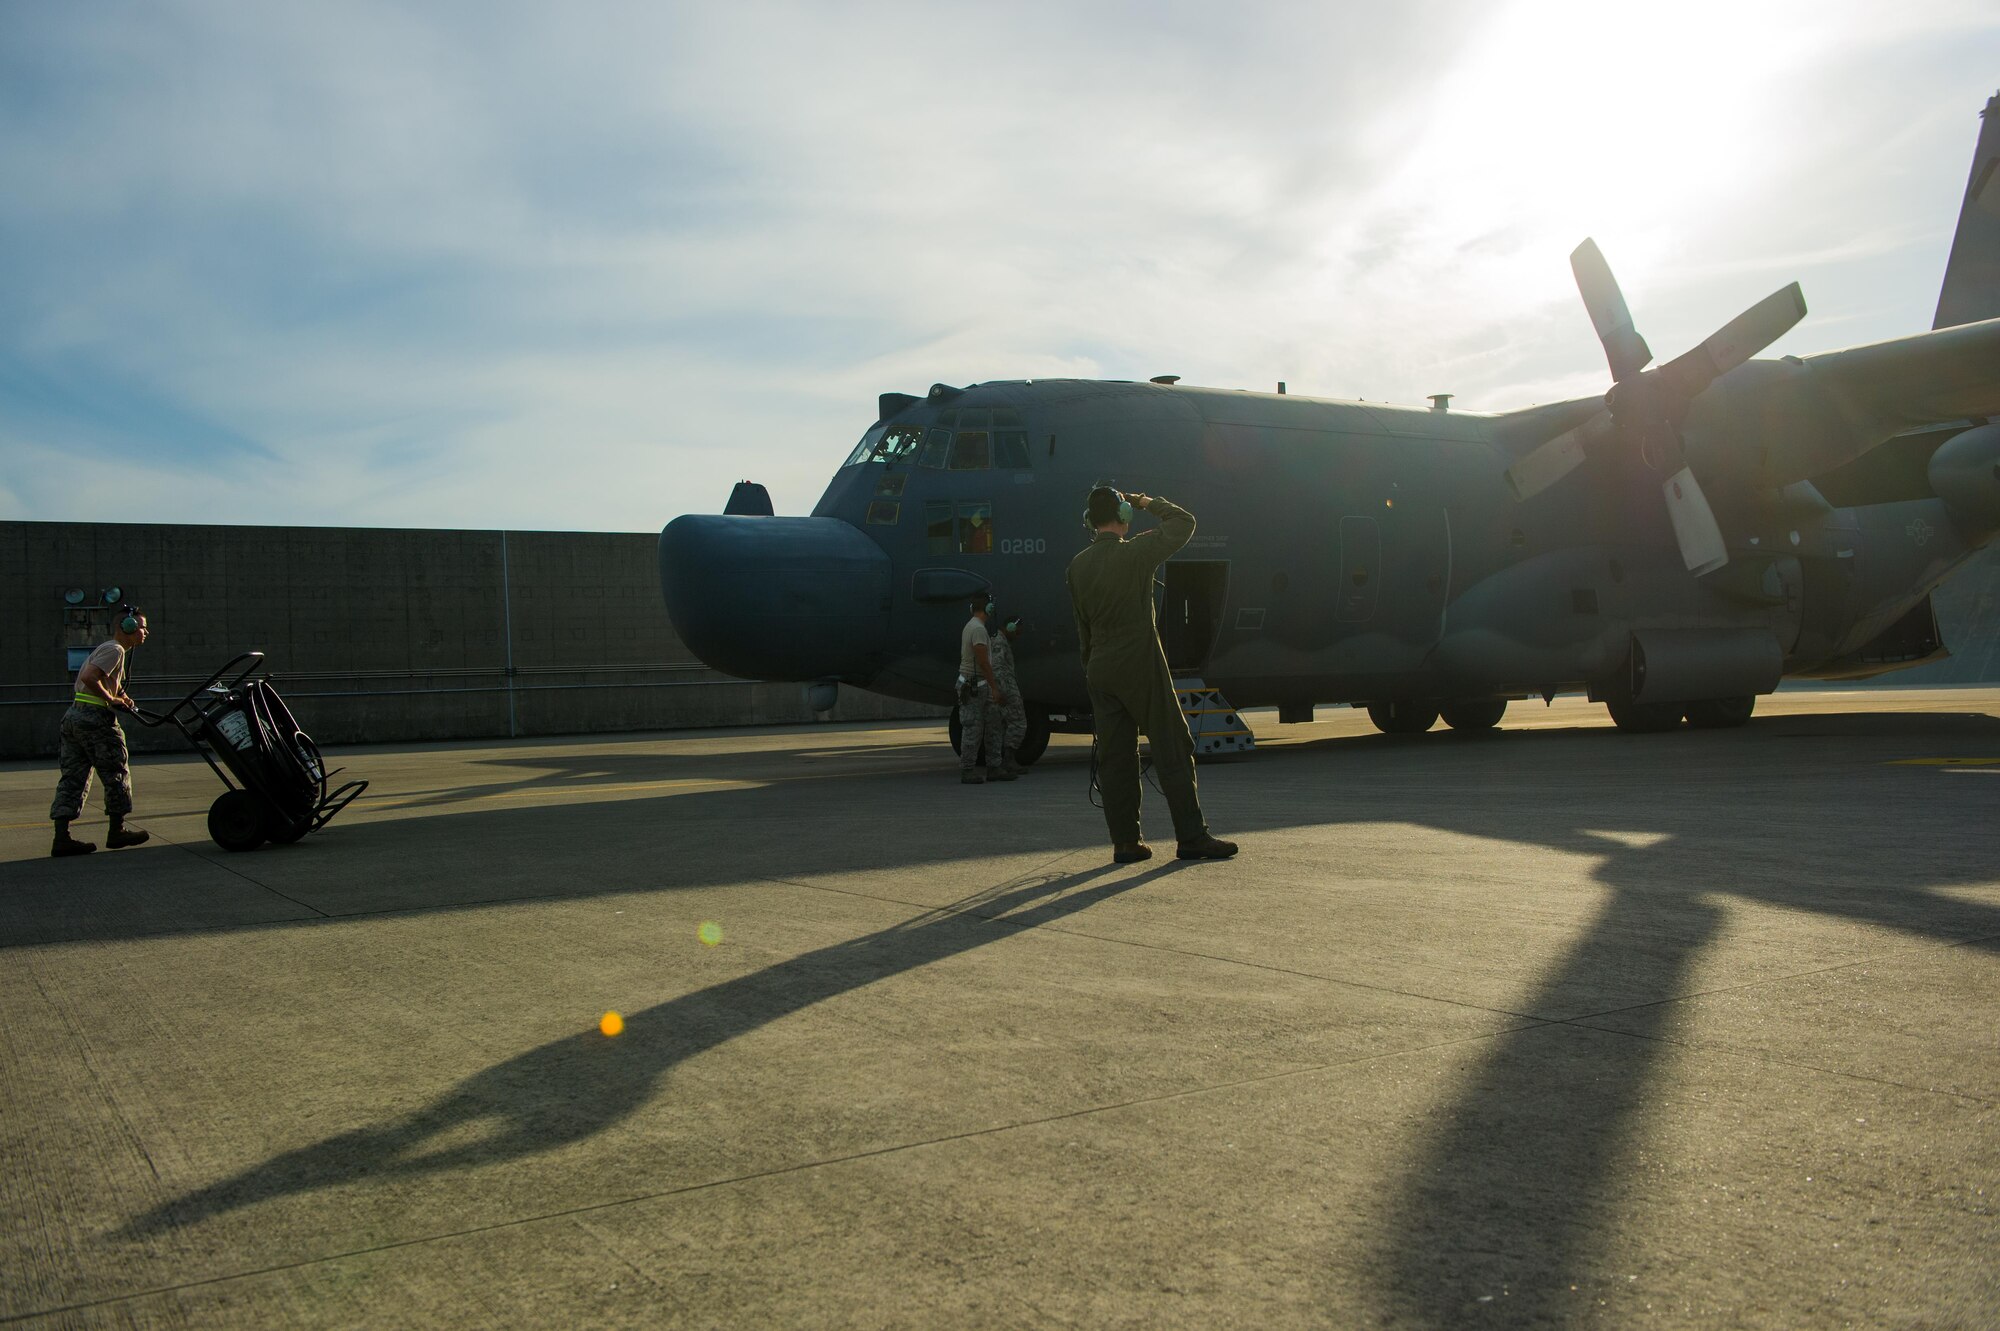 Two U.S. Air Force Airmen from the 1st Special Operations Squadron and the 353rd Special Operations Maintenance Squadron watch as the MC-130H Combat Talon II engine starts before a formation flight at Kadena Air Base, Japan, May 14, 2015. The 1st SOS and the 353rd SOMXS are part of the 353rd Special Operations Group.  As the only Air Force special operations group in the Pacific, they are the focal point for Air Force special operations activities throughout the United States Pacific Command Theater.     (U.S. Air Force photo by Airman 1st Class Tyler Woodward)